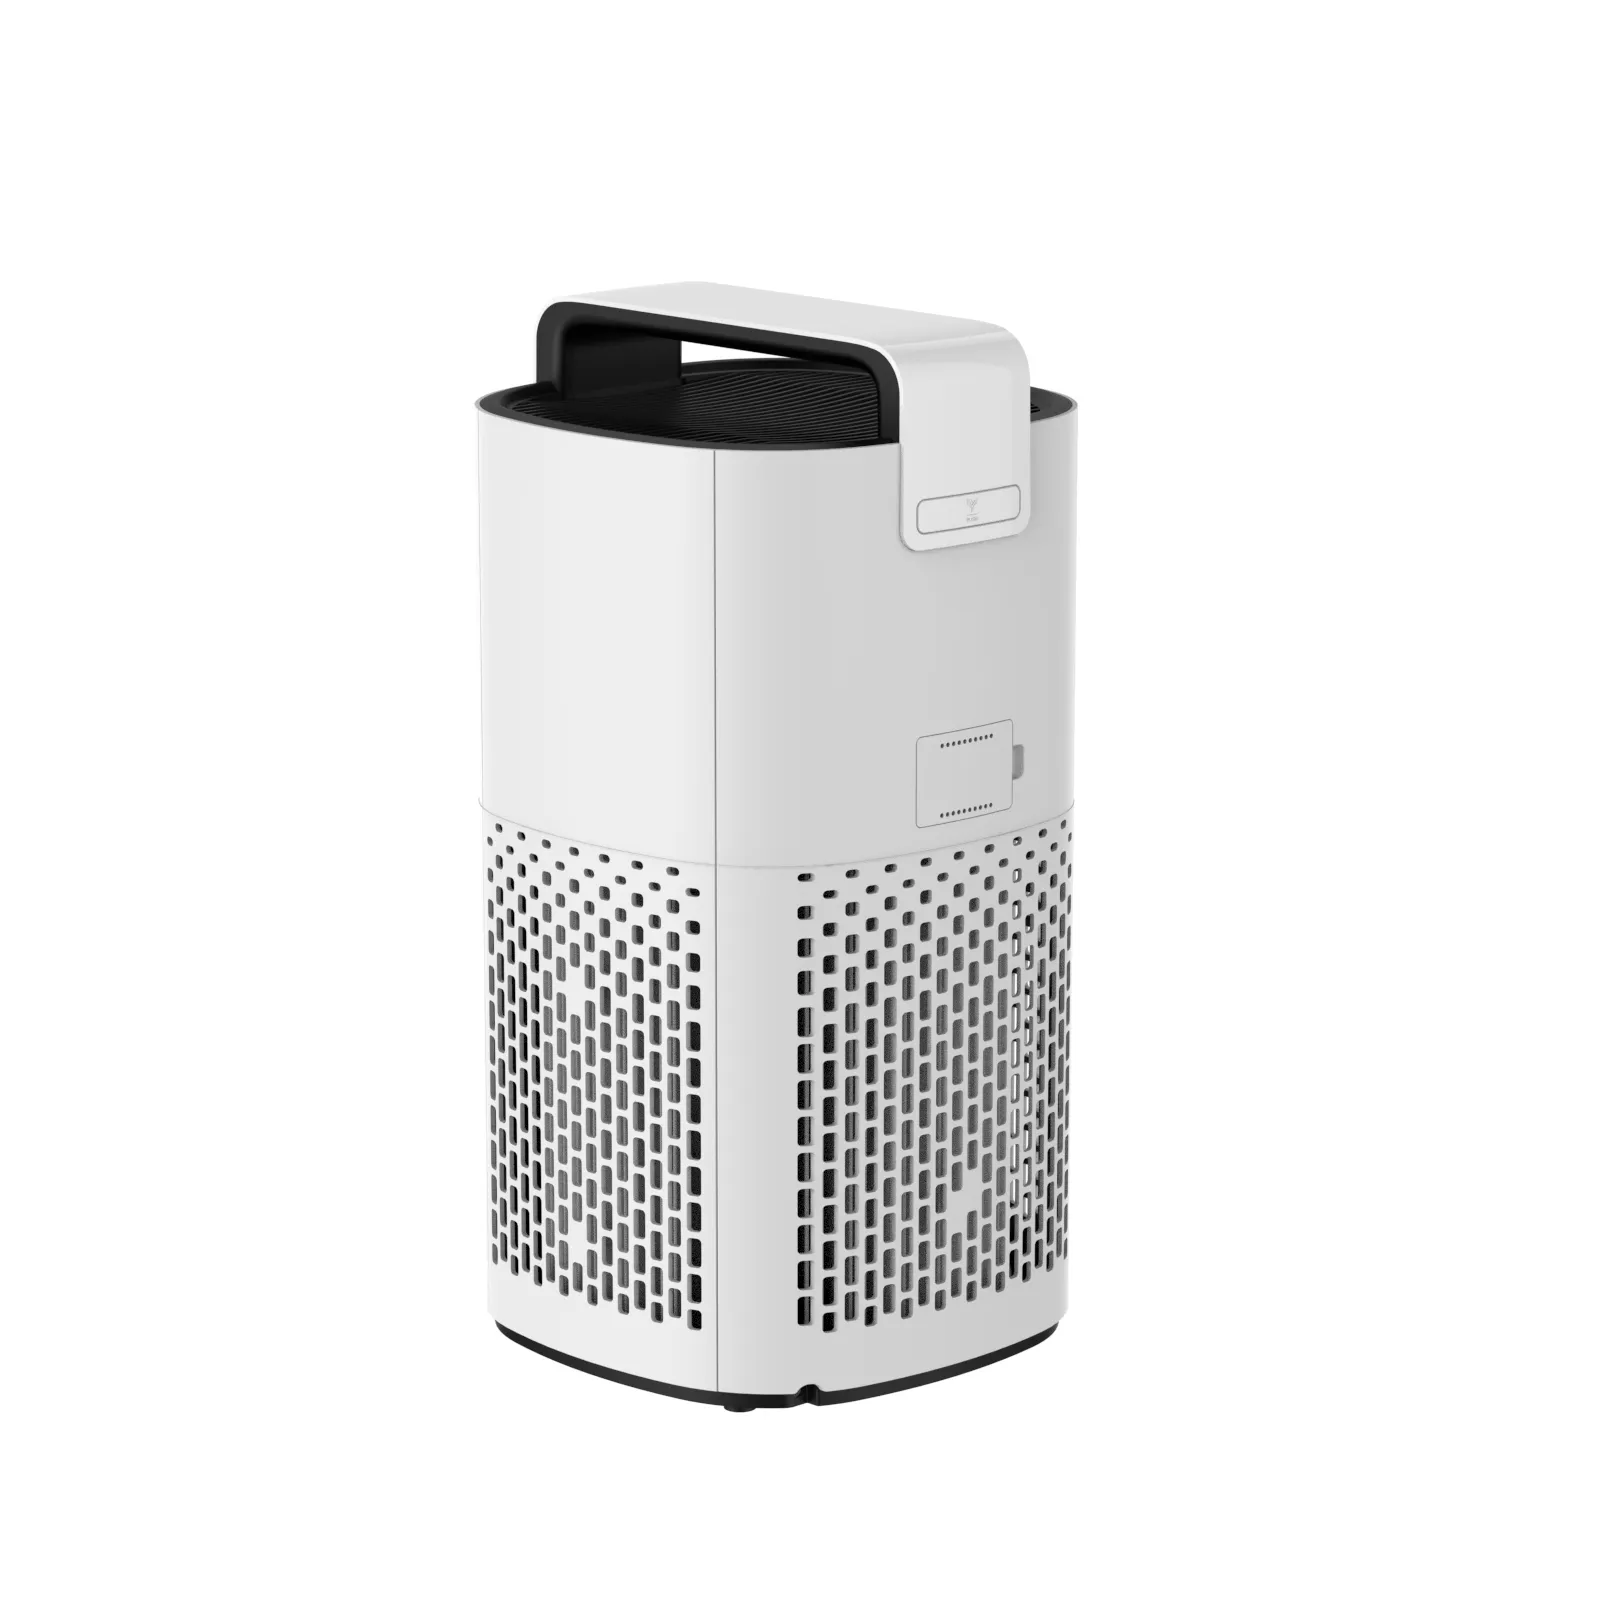 filter change reminder Air cleaner with HEPA Filter smart air purifier hepa purifier air